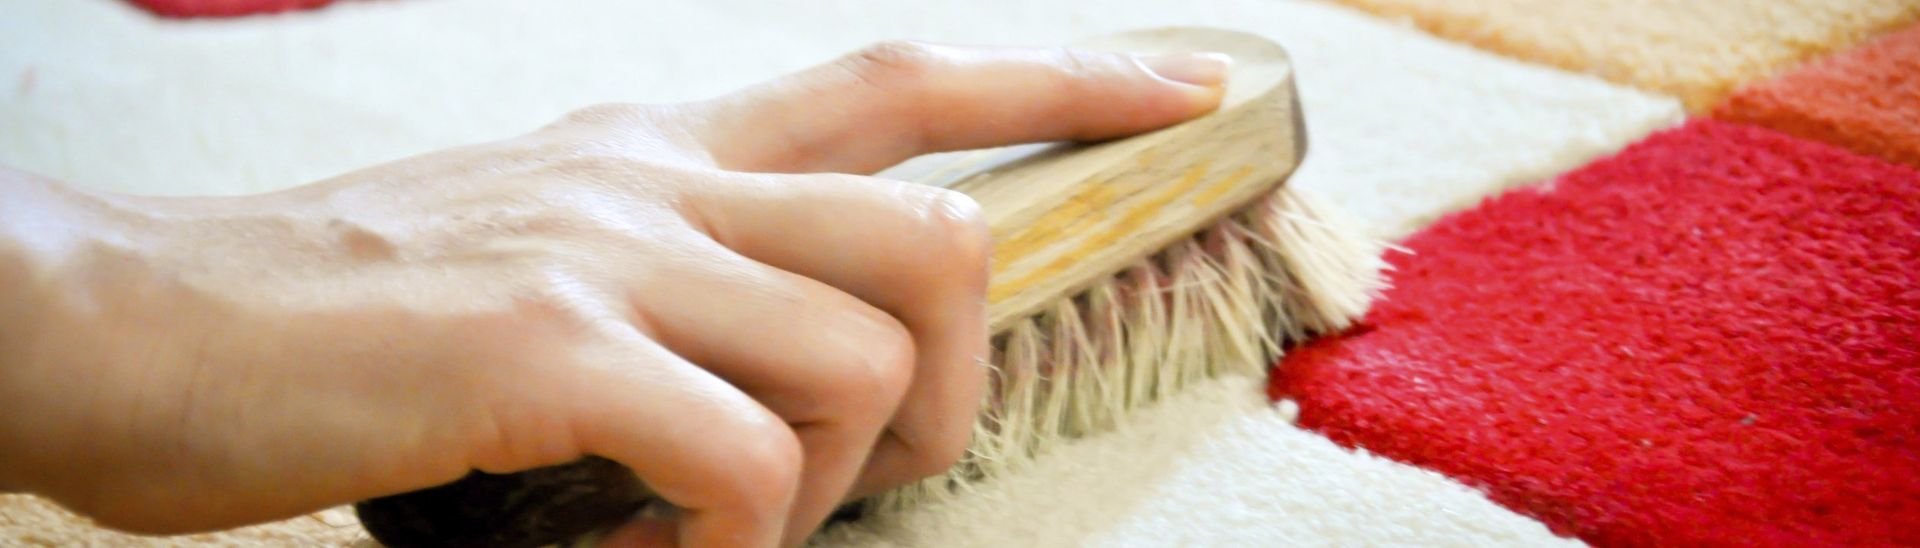 A woman cleaning a carpet